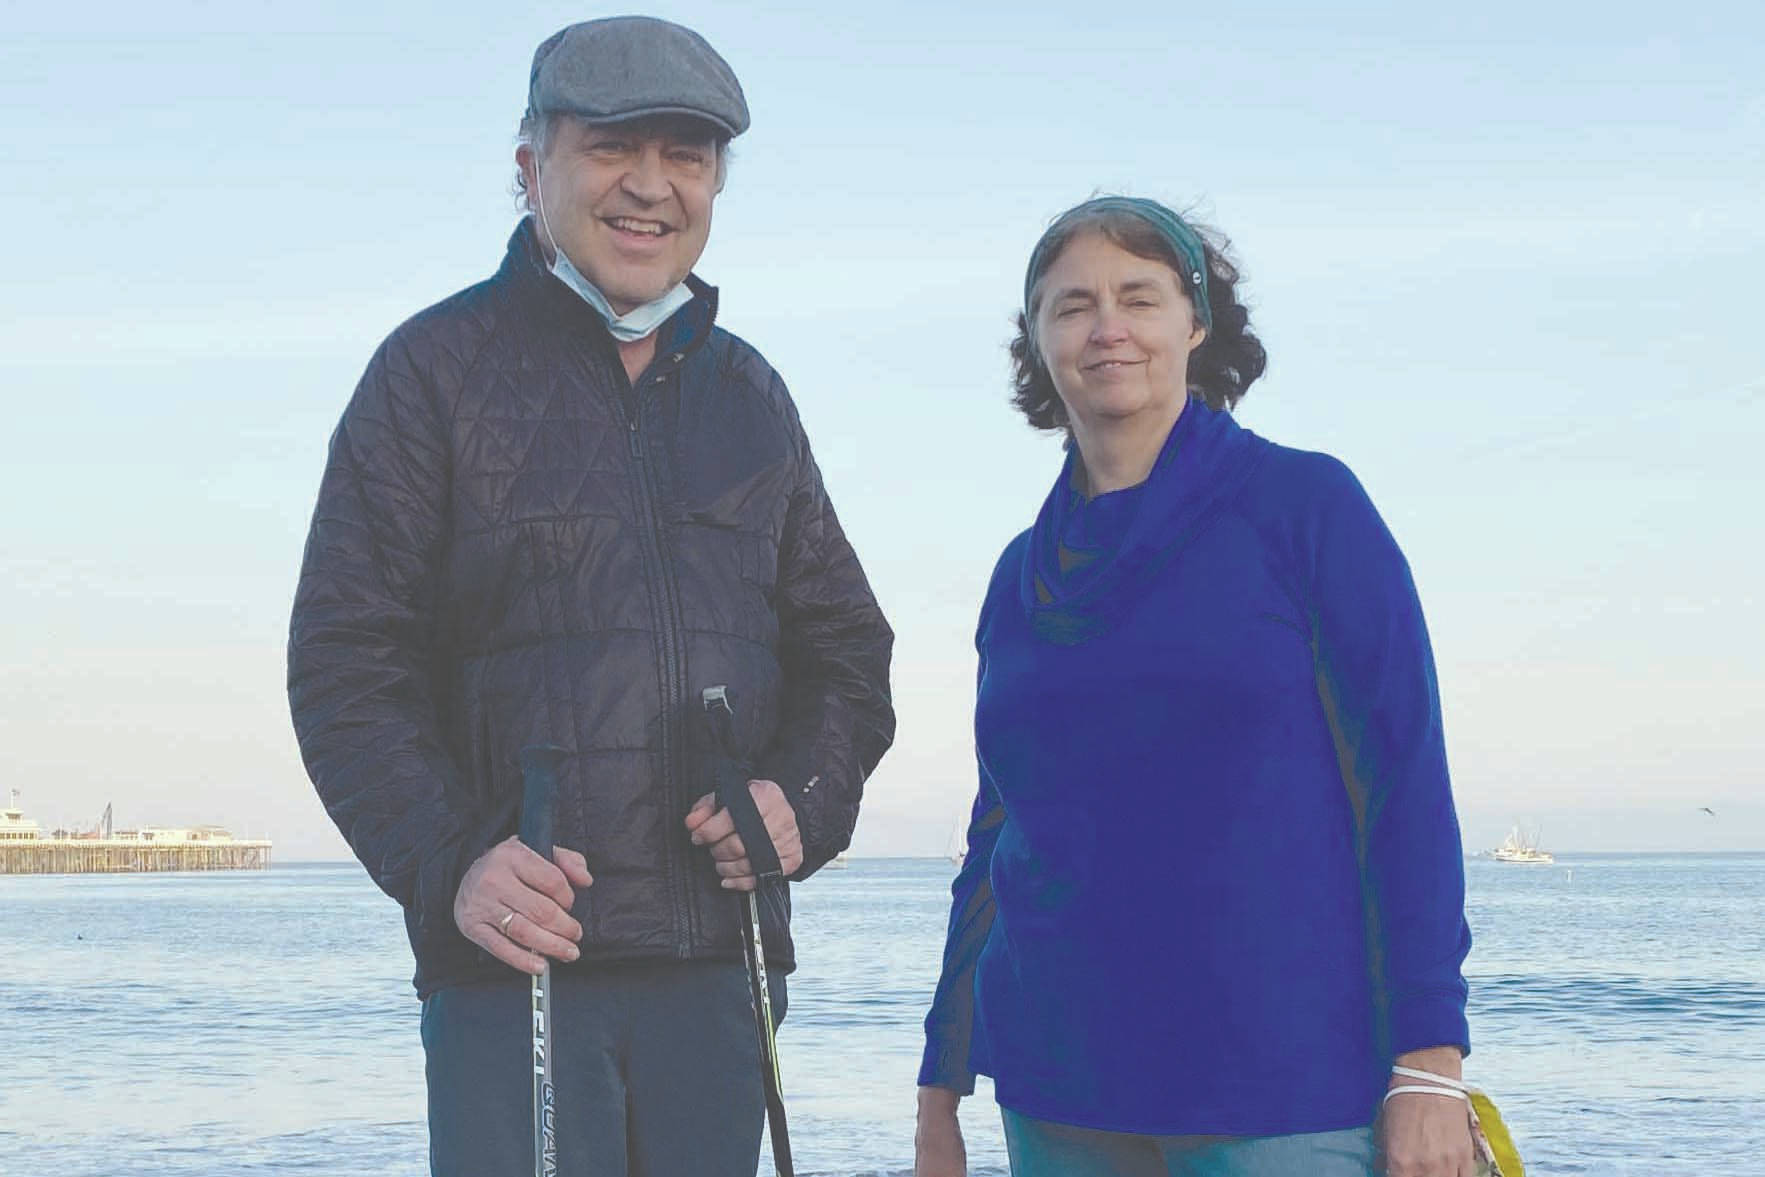 Ted and Valerie McKenney in Santa Cruz, California, in April 2020. (Photo by Courtney Procter)